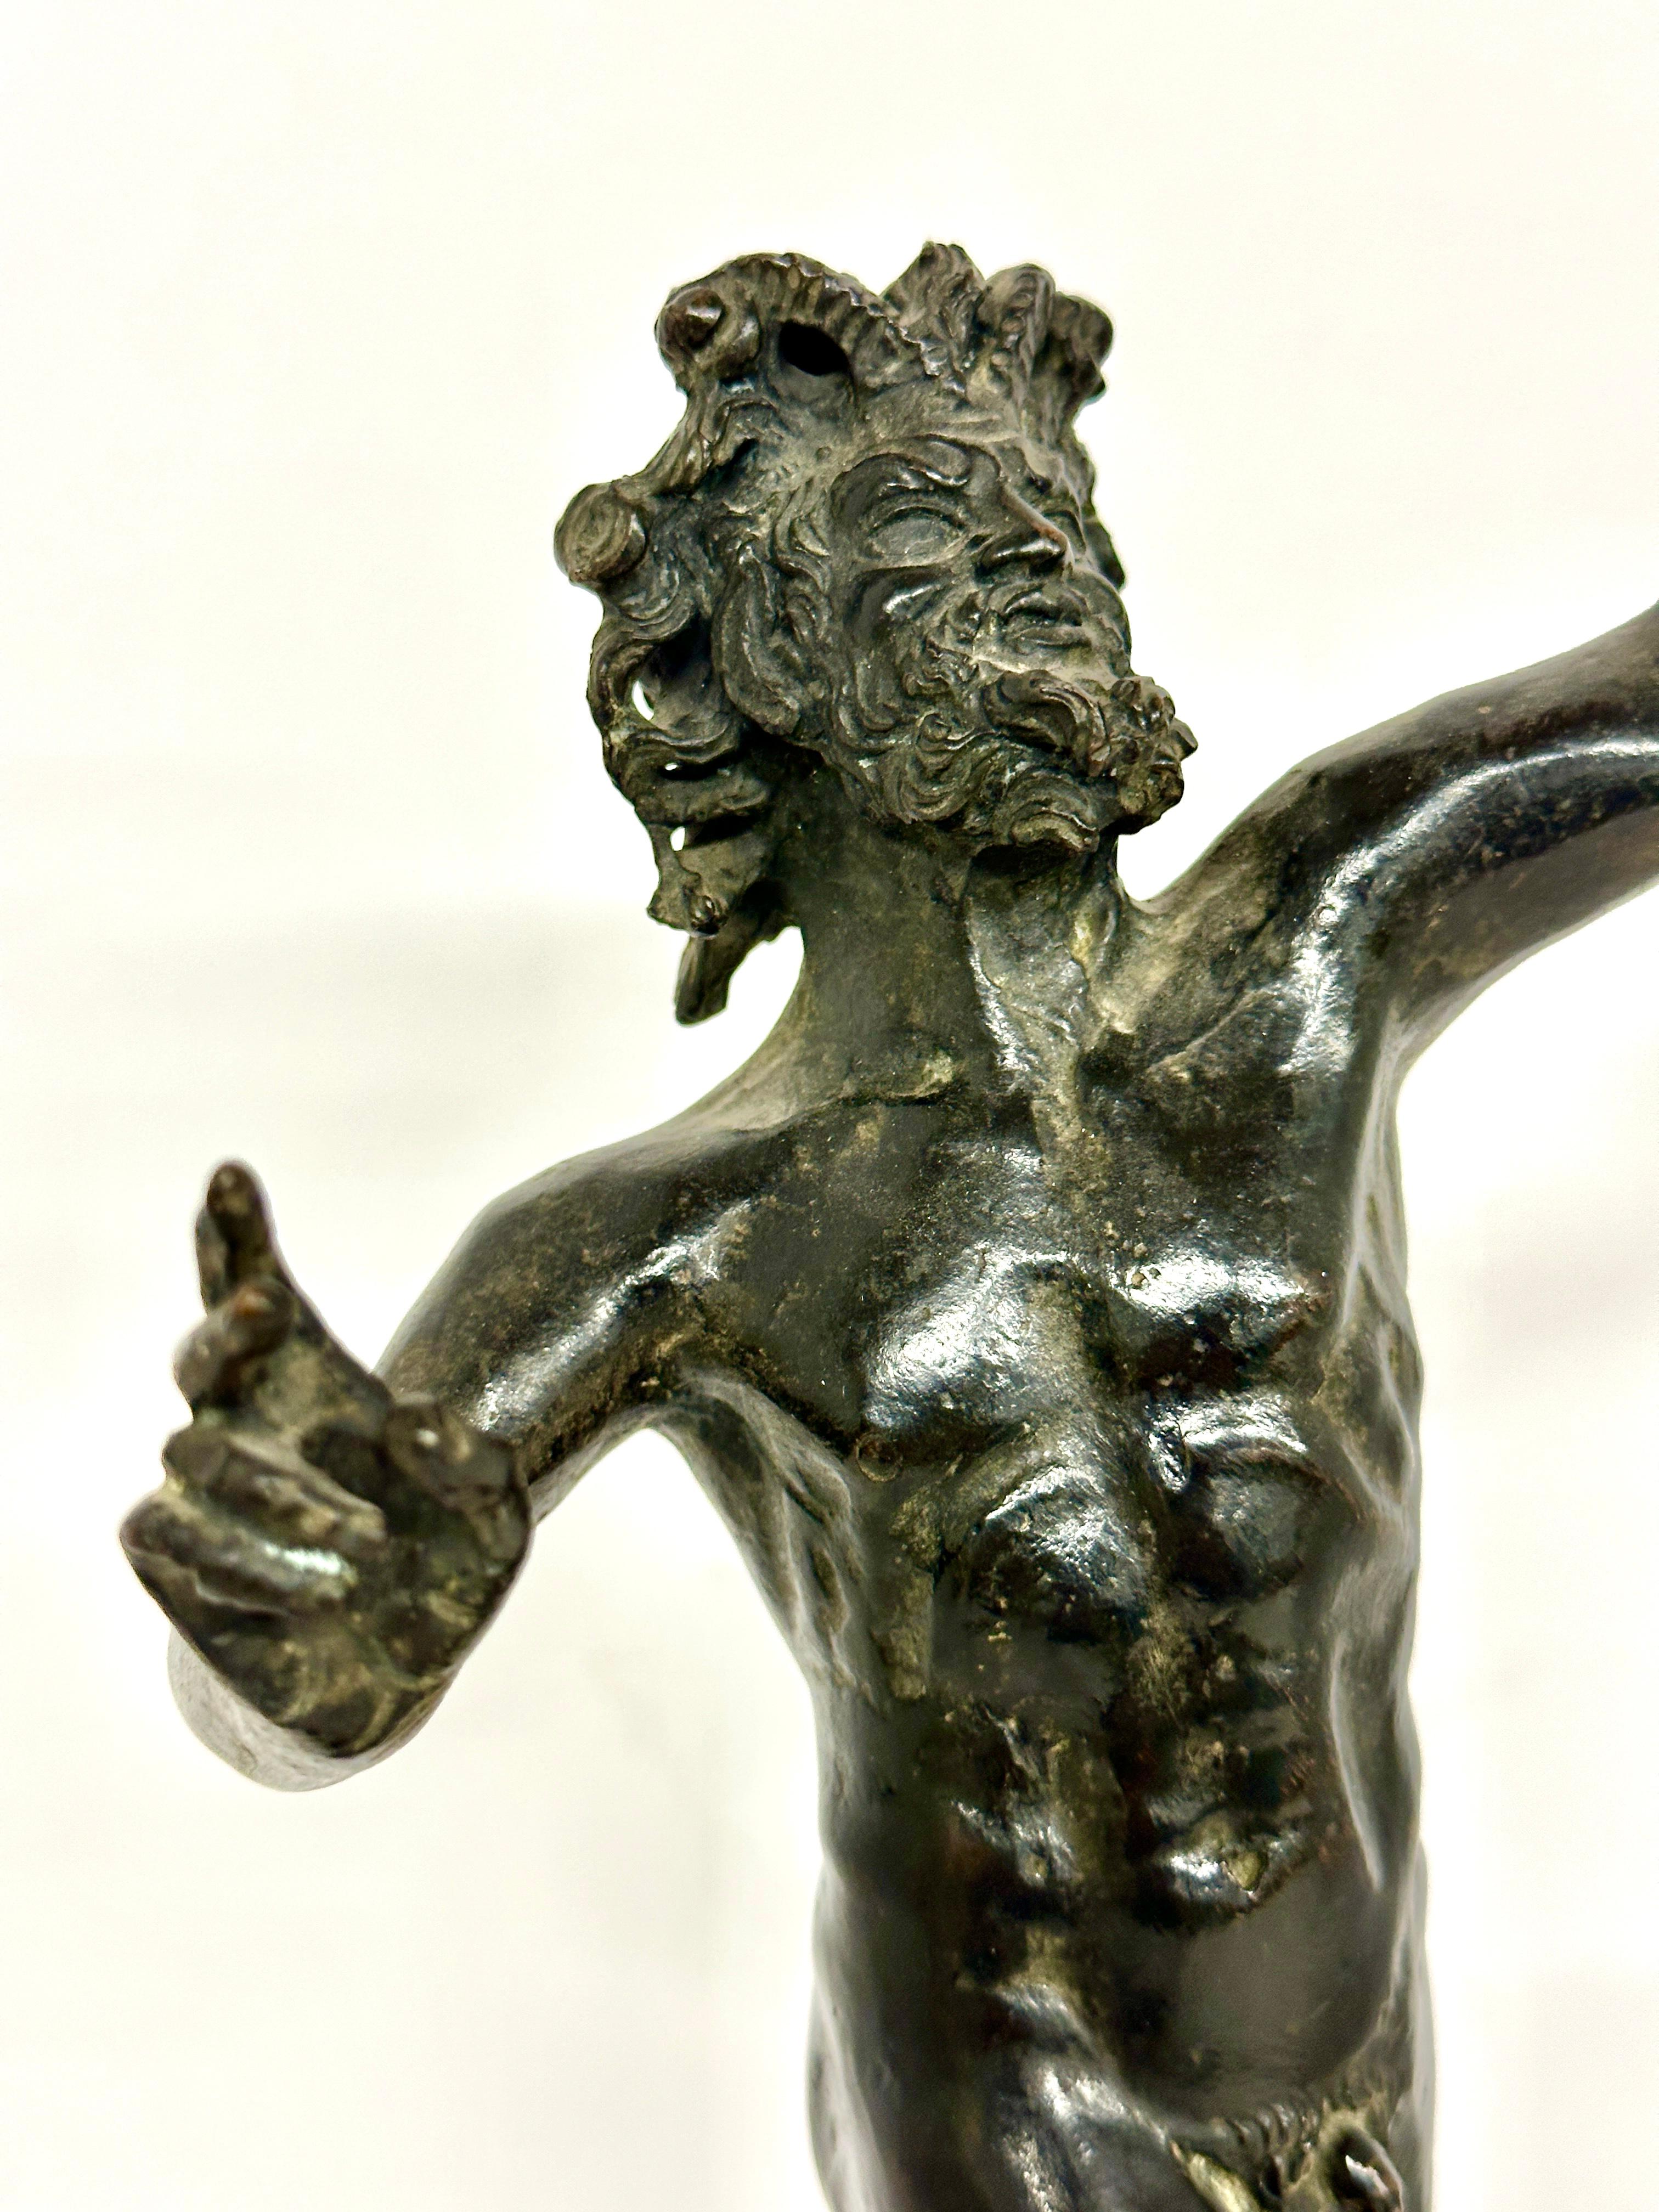 A lovely  and well cast example of the Pompeian Dancing Faun. This grand tour bronze stands approx 11.75 inches tall about half size of the original unearthed in Pompeii. Beautiful patina.
In good condition.